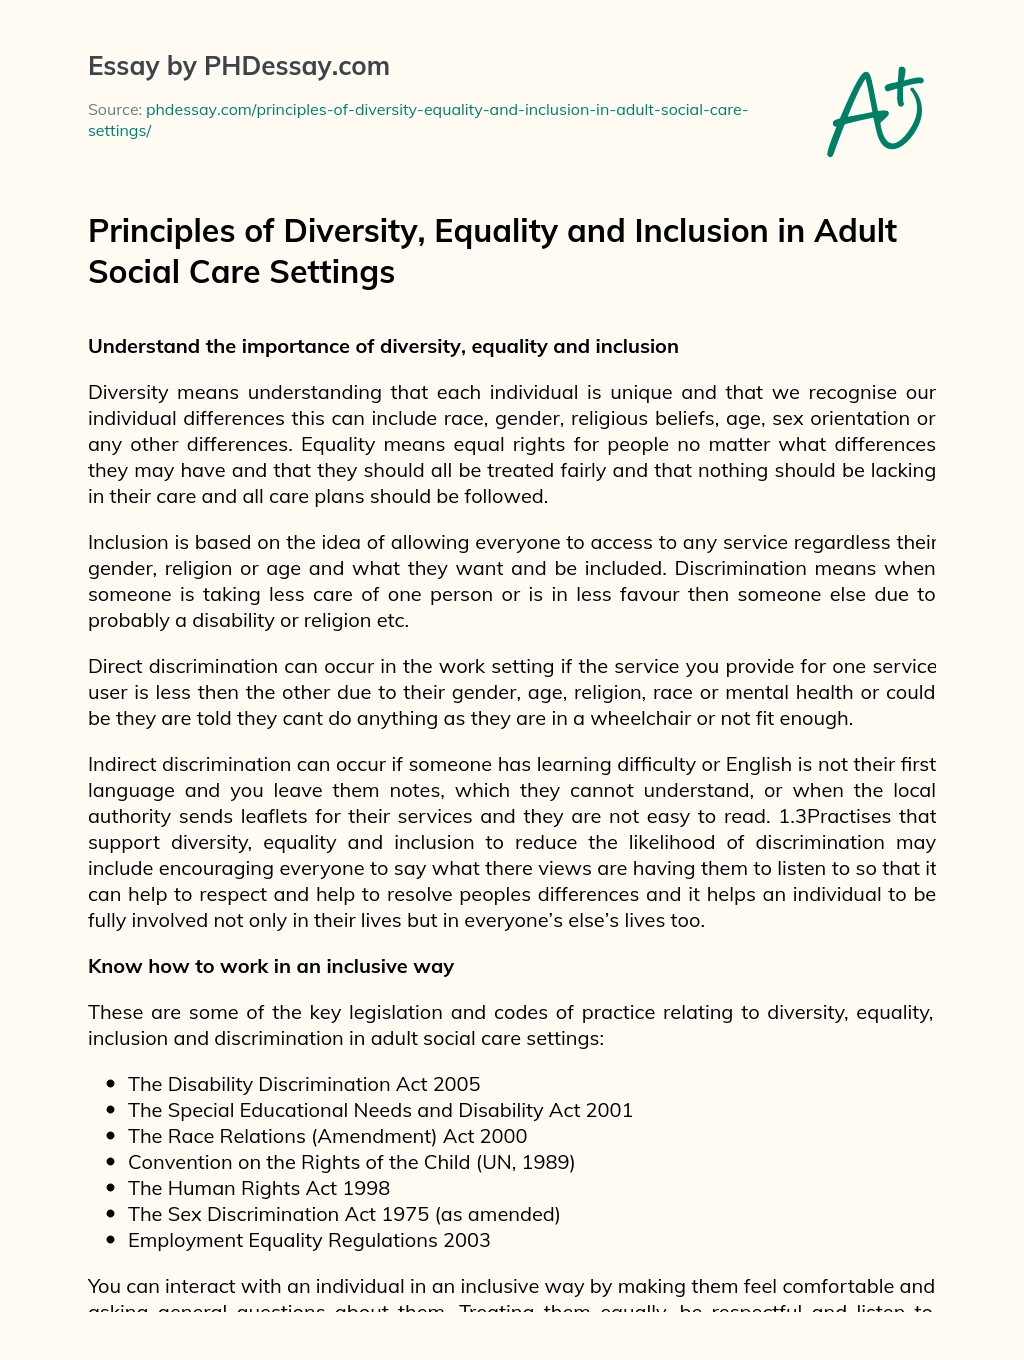 essay on equality diversity and inclusion